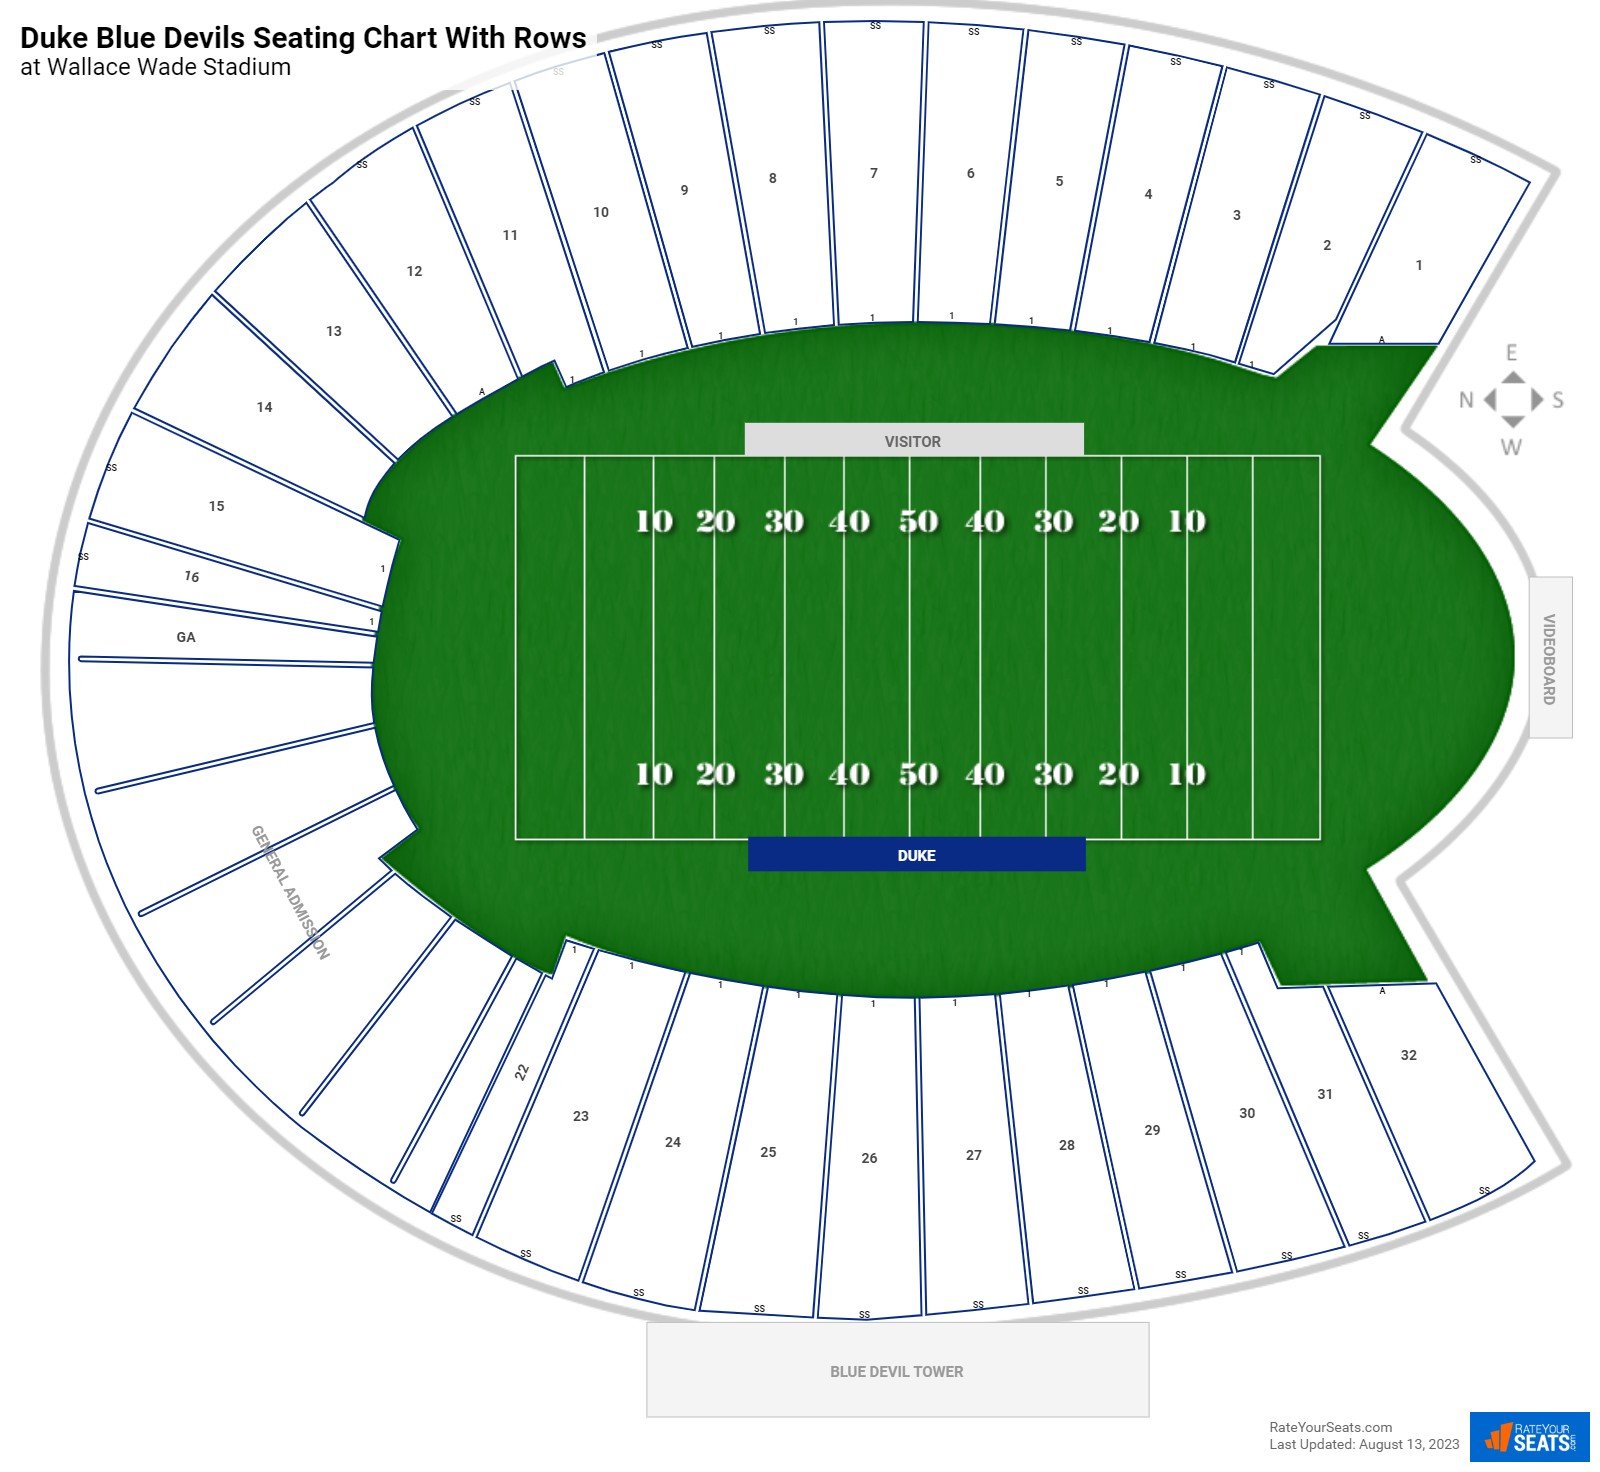 Wallace Wade Stadium seating chart with row numbers